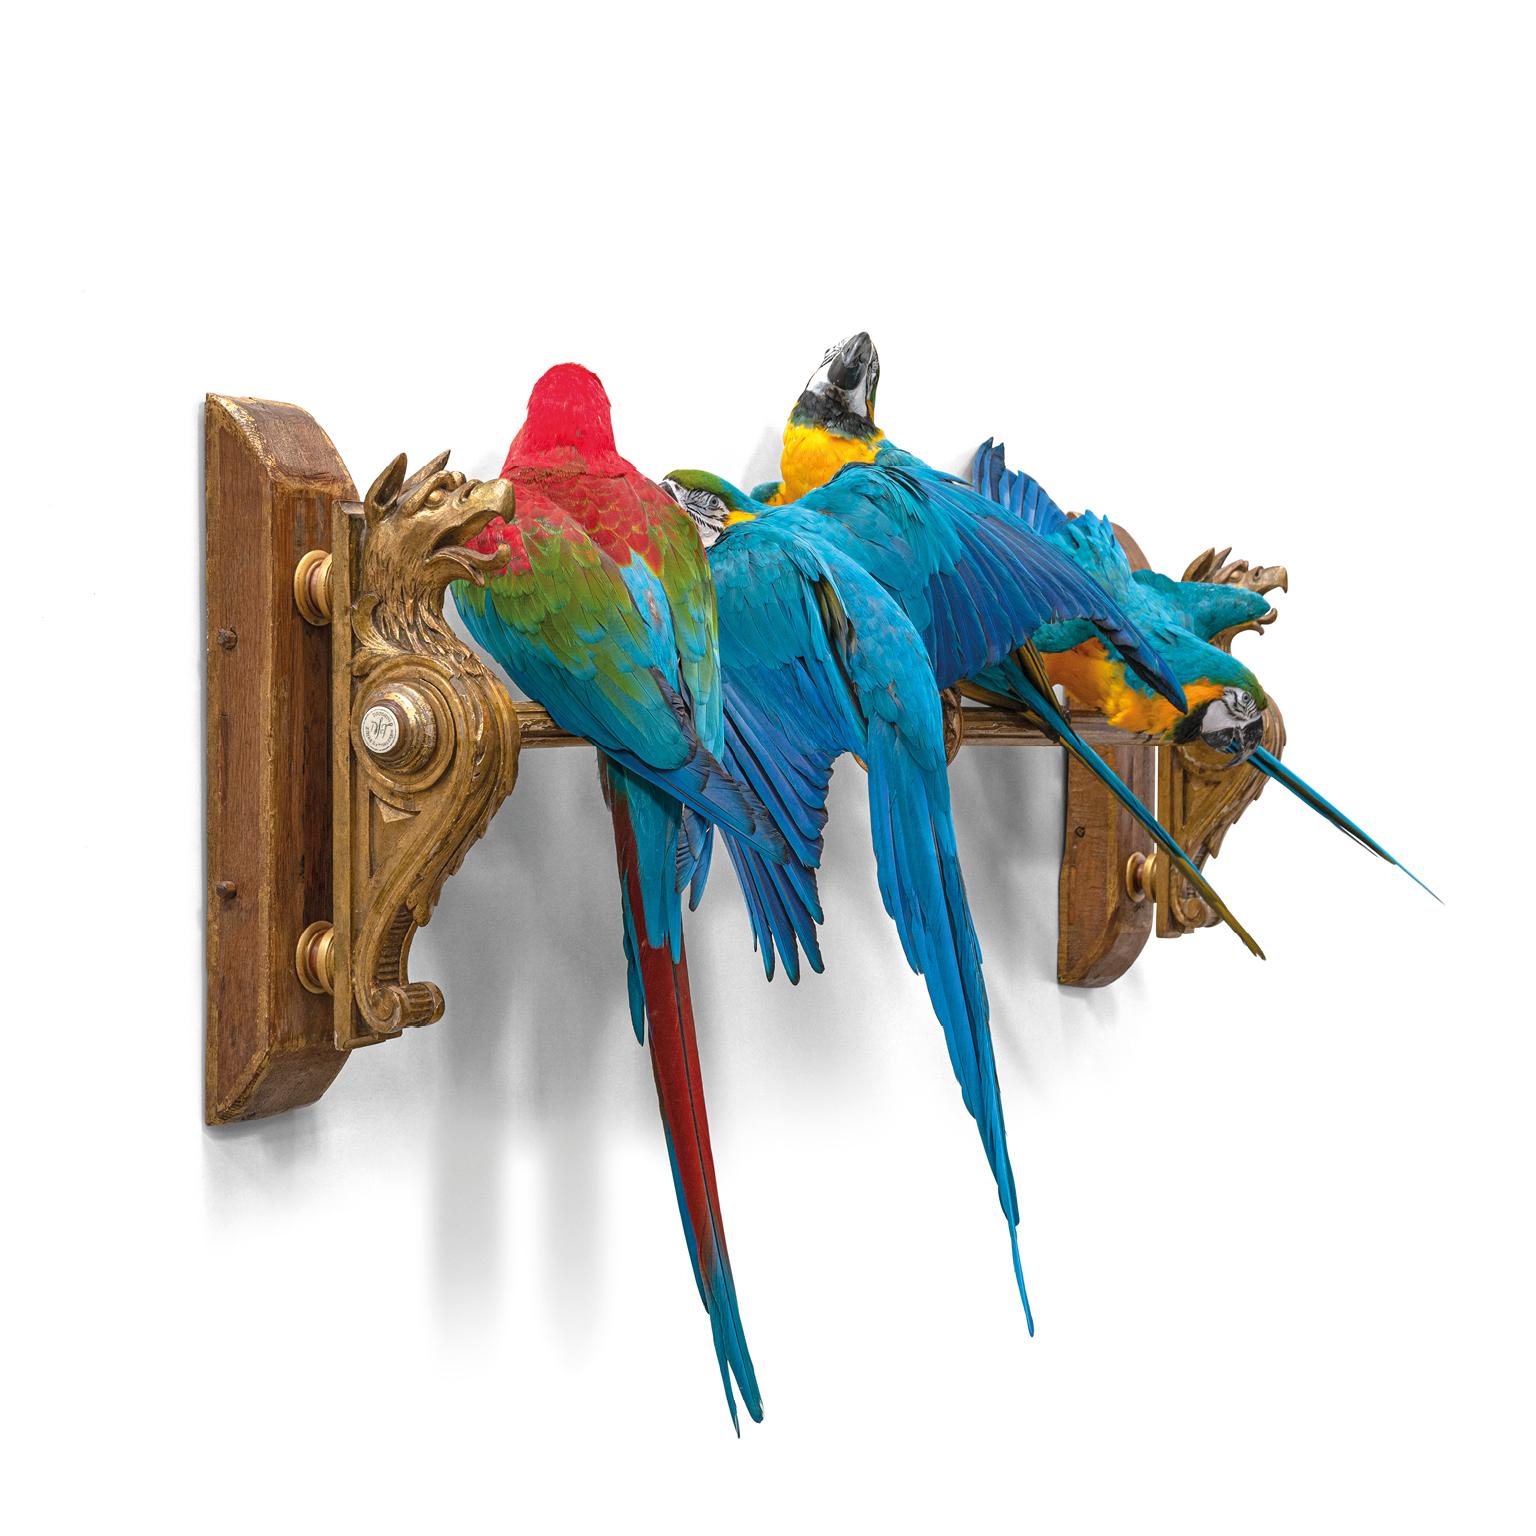 Four magnificent macaws on a row. Perched on a gild wooden ornament that is waal mounted. A composition inspired by the famous 17th century Hondecoeter paintings. Resulting in a dynamic tableaux that exploding in colour.

One Red-and-green macaw